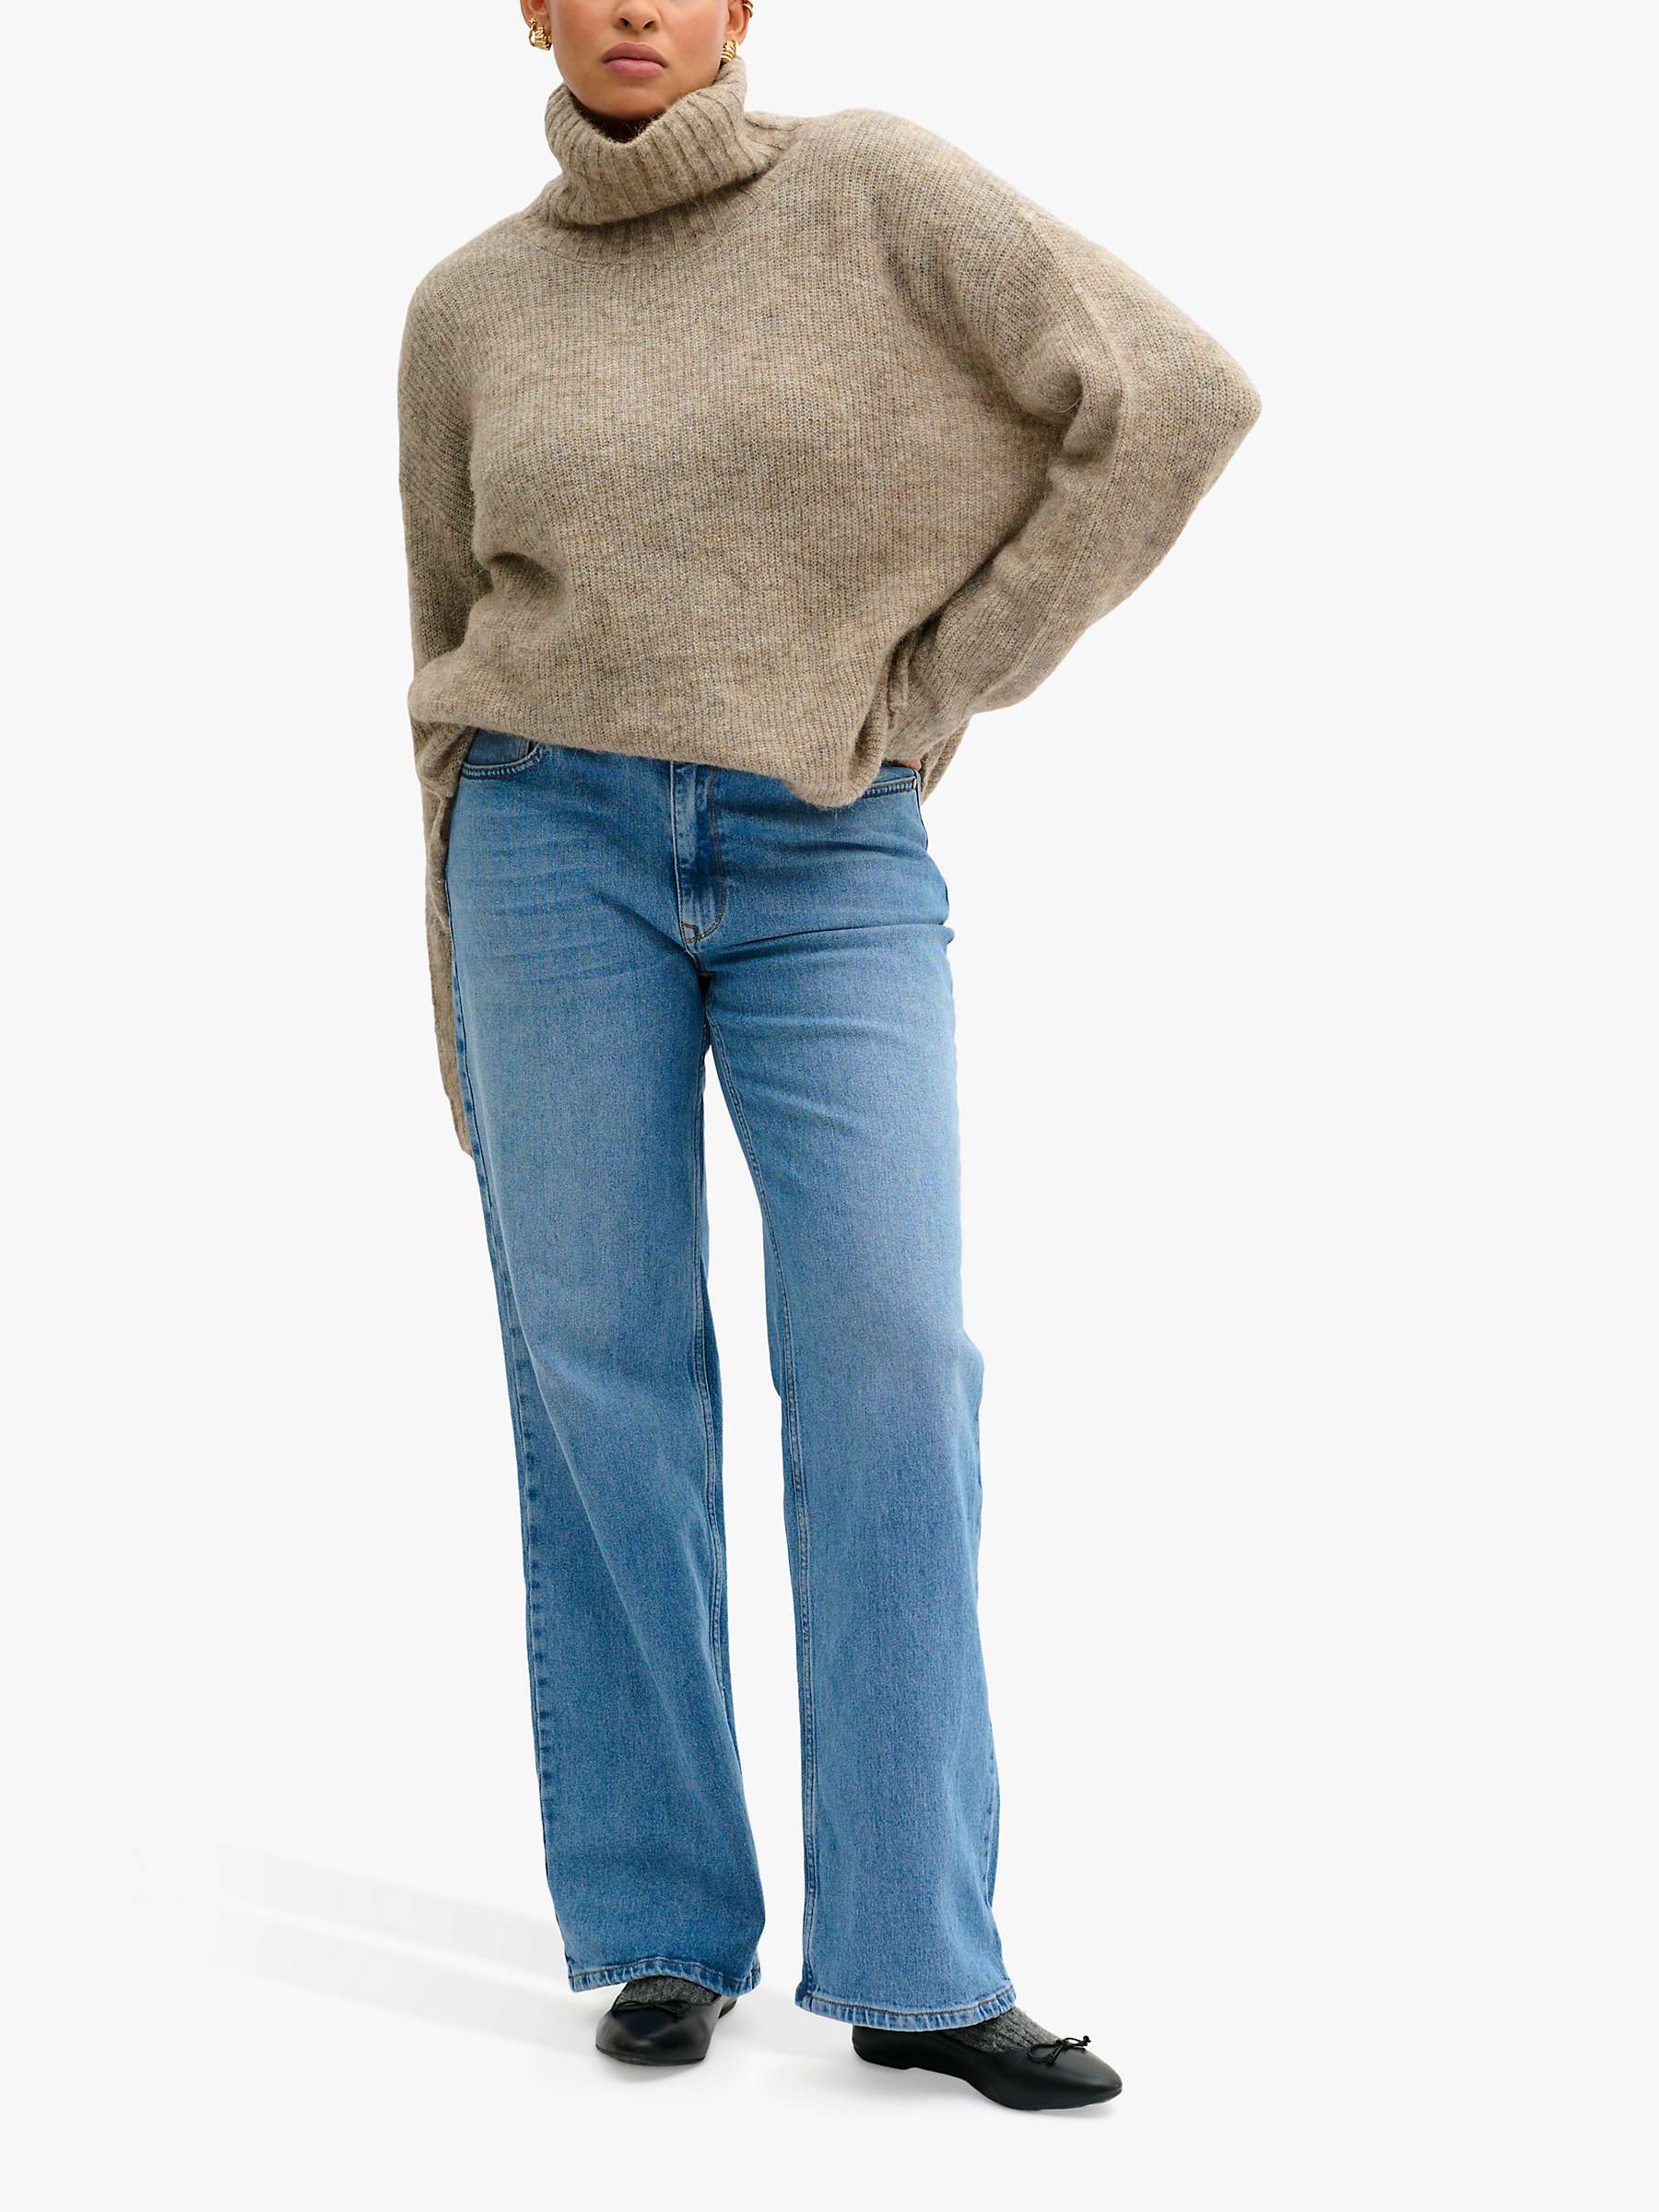 Buy MY ESSENTIAL WARDROBE Louis High Waisted Wide Leg Jeans Online at johnlewis.com